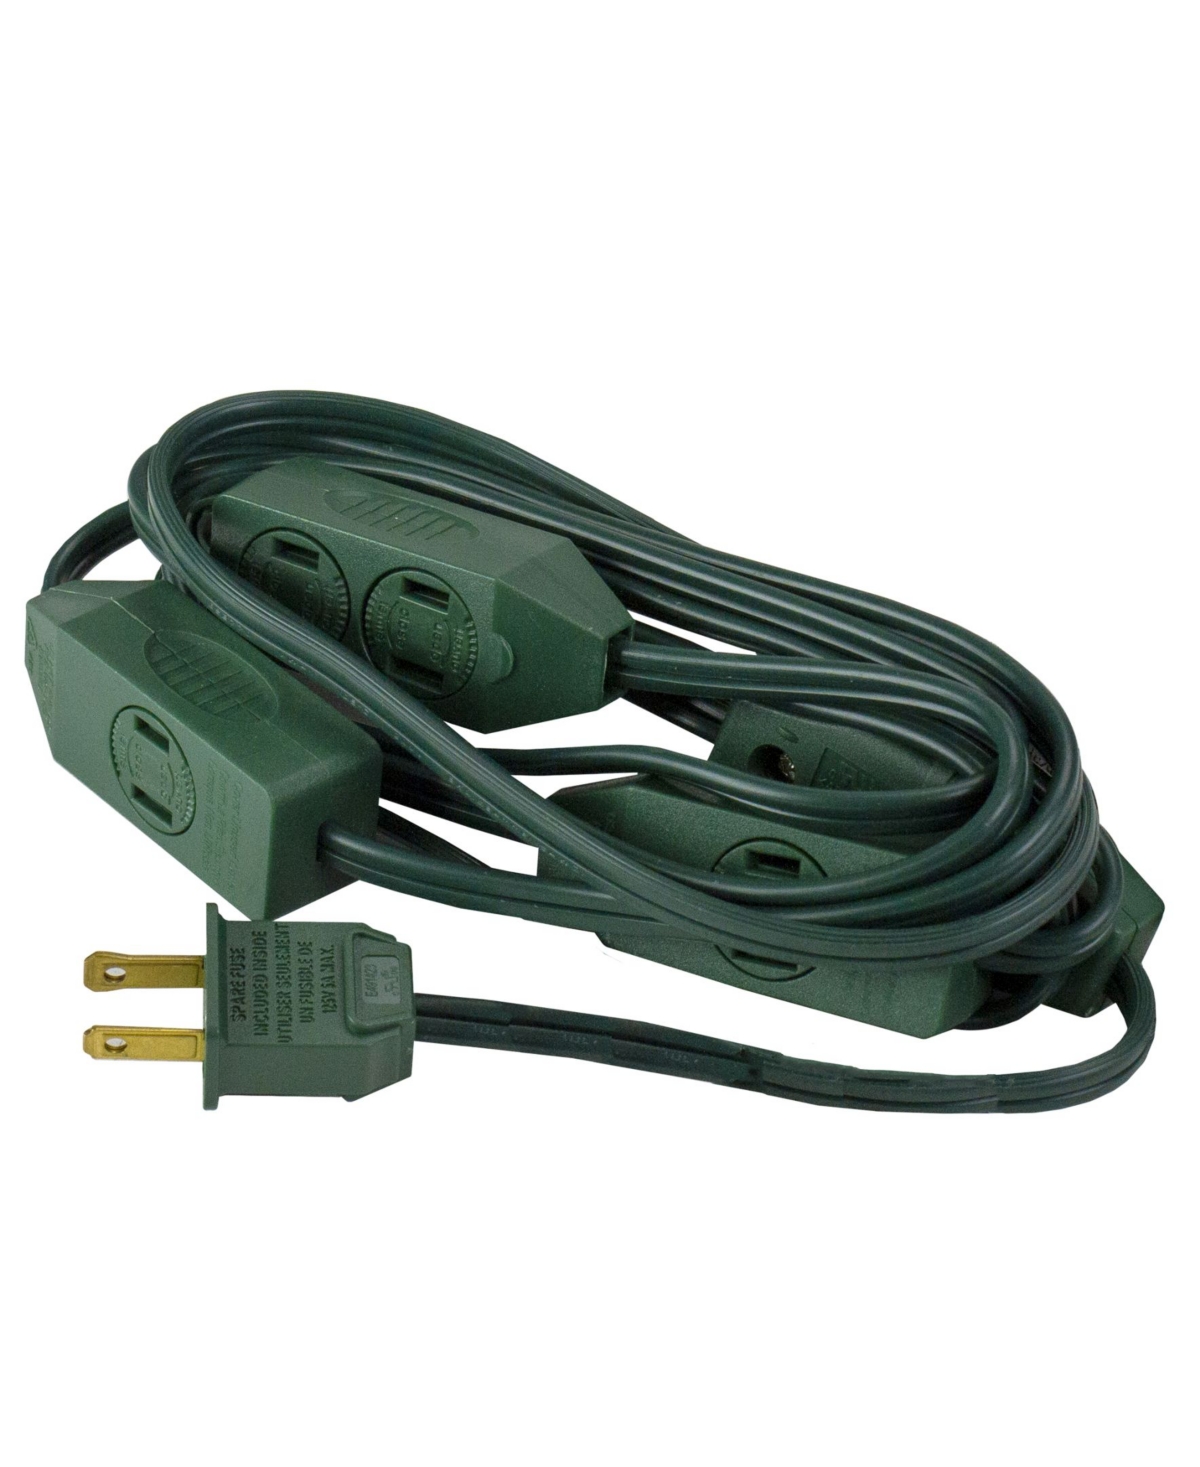 9' Indoor Extension Power Cord with 9-Outlets and Foot Switch - Multi-Colored